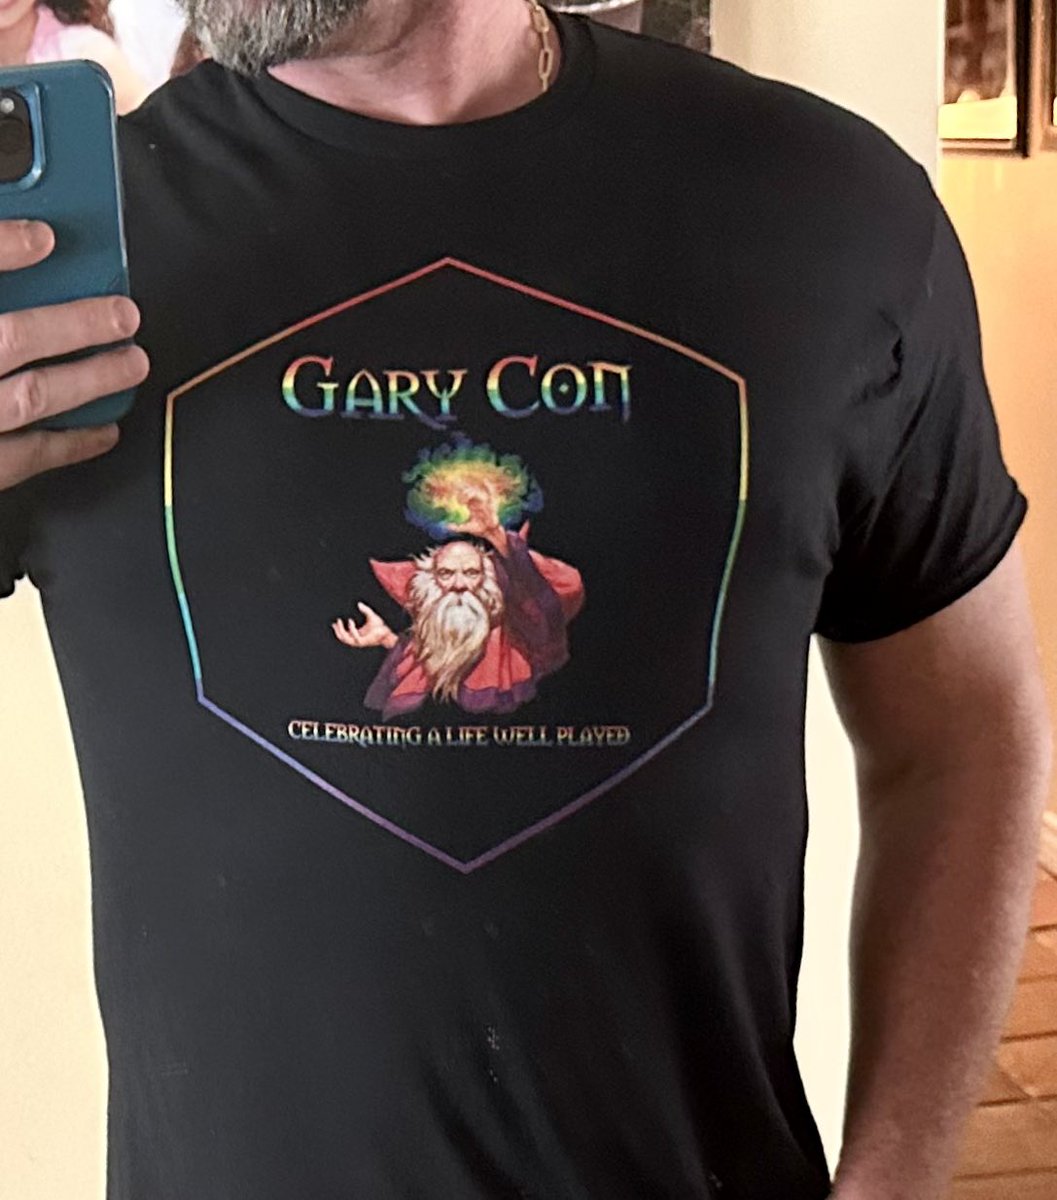 My Gary Con Pride shirt came in the mail today! I think it looks great. Get yours here: garycon.com/product/gary-c… #ttrpg #garycon #Pride #dnd #gygax #garygygax #G20